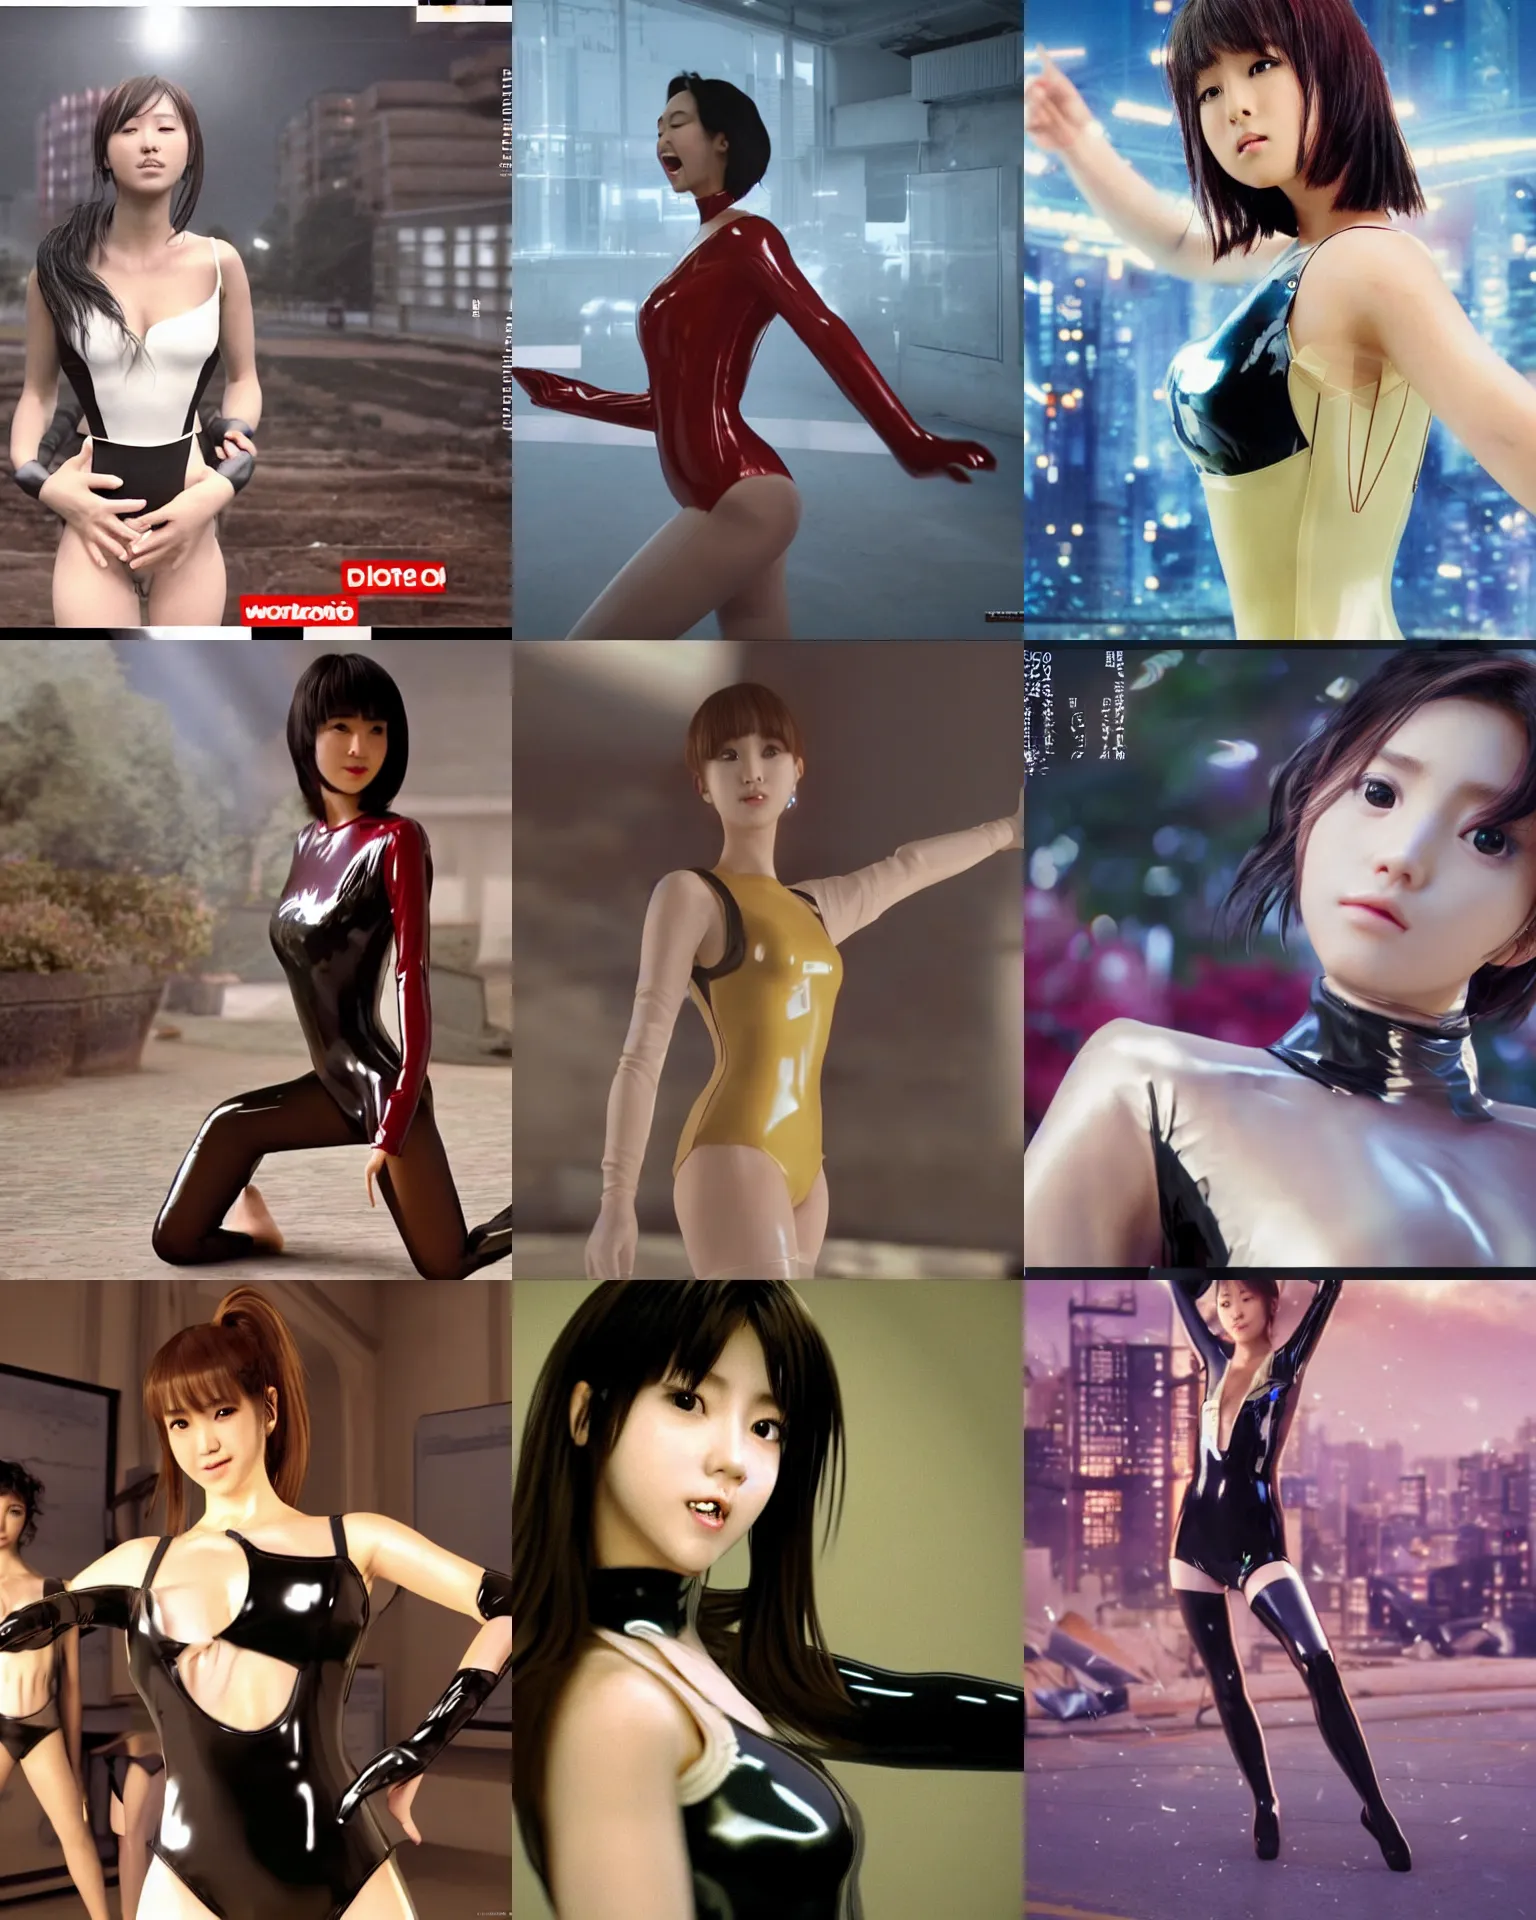 Prompt: Worksafe,clothed.1990s,unbelievably beautiful,perfect,dynamic,epic,cinematic videogame CG cutscene of a close-up beautiful cute young J-Pop idol actress girl in latex leotard,expressing joy.By a Iranian movie director.Motion,VFX,Inspirational arthouse,high budget,hollywood style,at Behance,at Netflix,Instagram filters,Photoshop,Adobe Lightroom,Adobe After Effects,taken with polaroid kodak portra